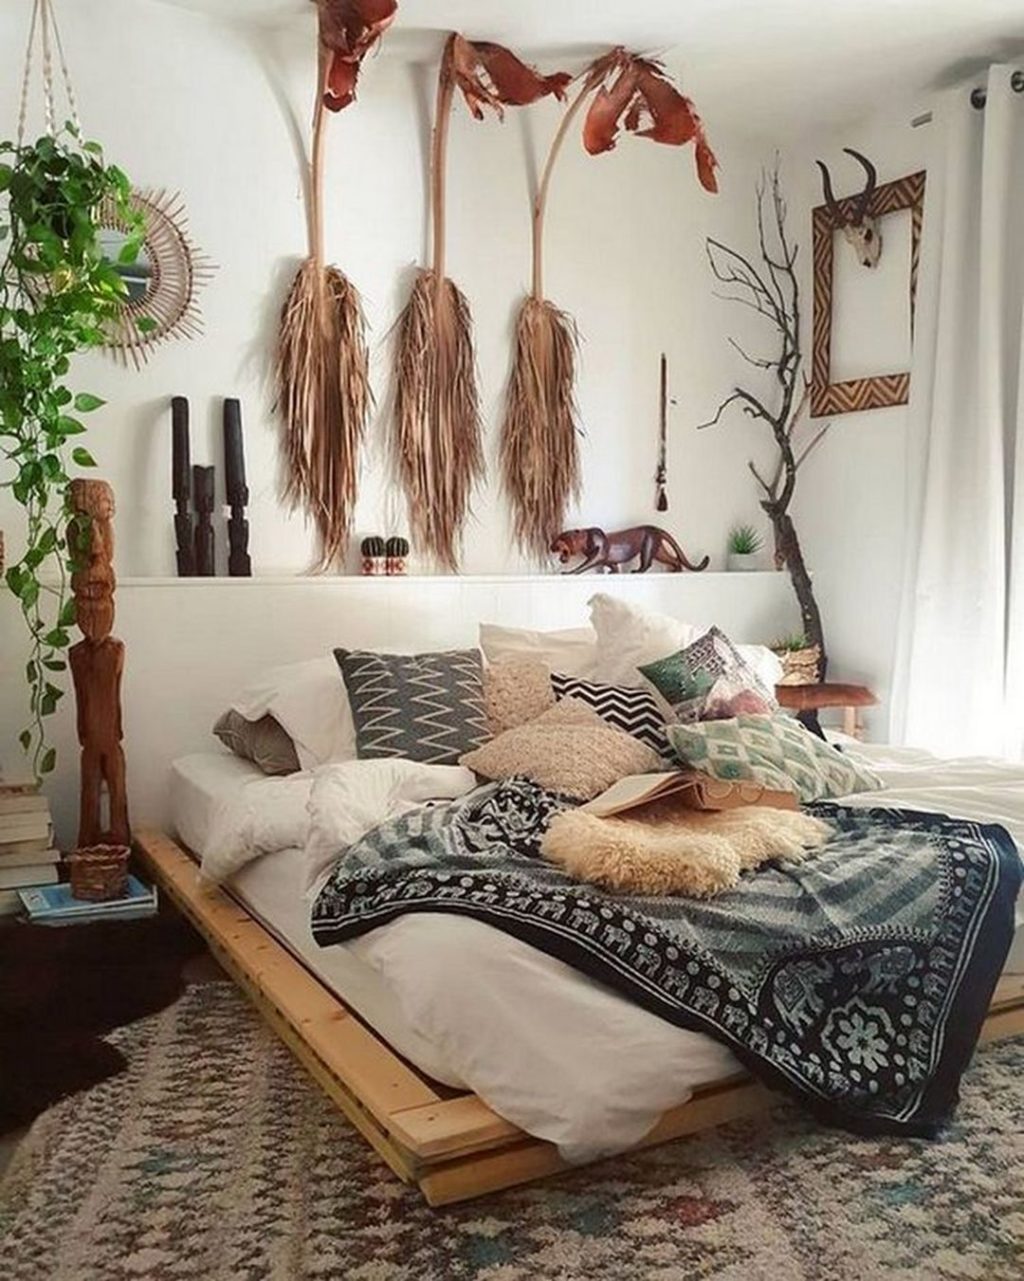 Awesome Bohemian Bedroom Design Ideas